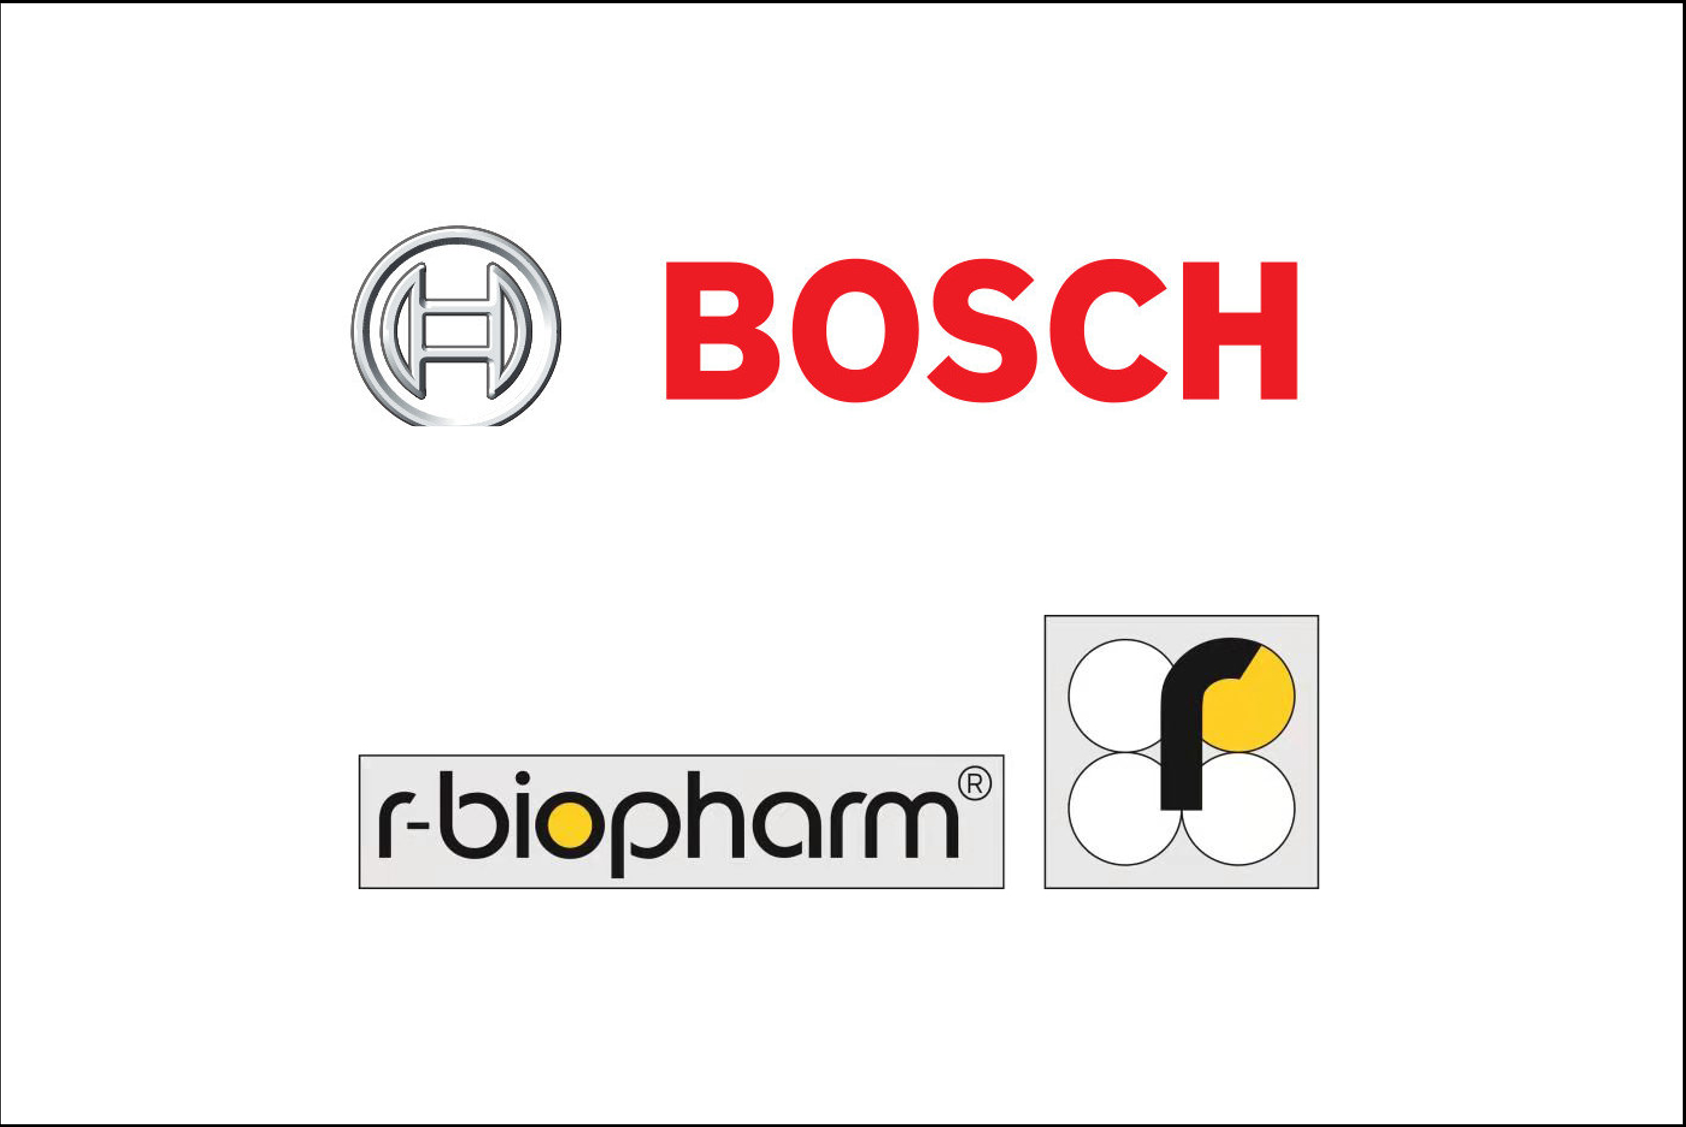 Additional partnership in medical technology: Bosch and R-Biopharm to strengthen Vivalytic analysis platform